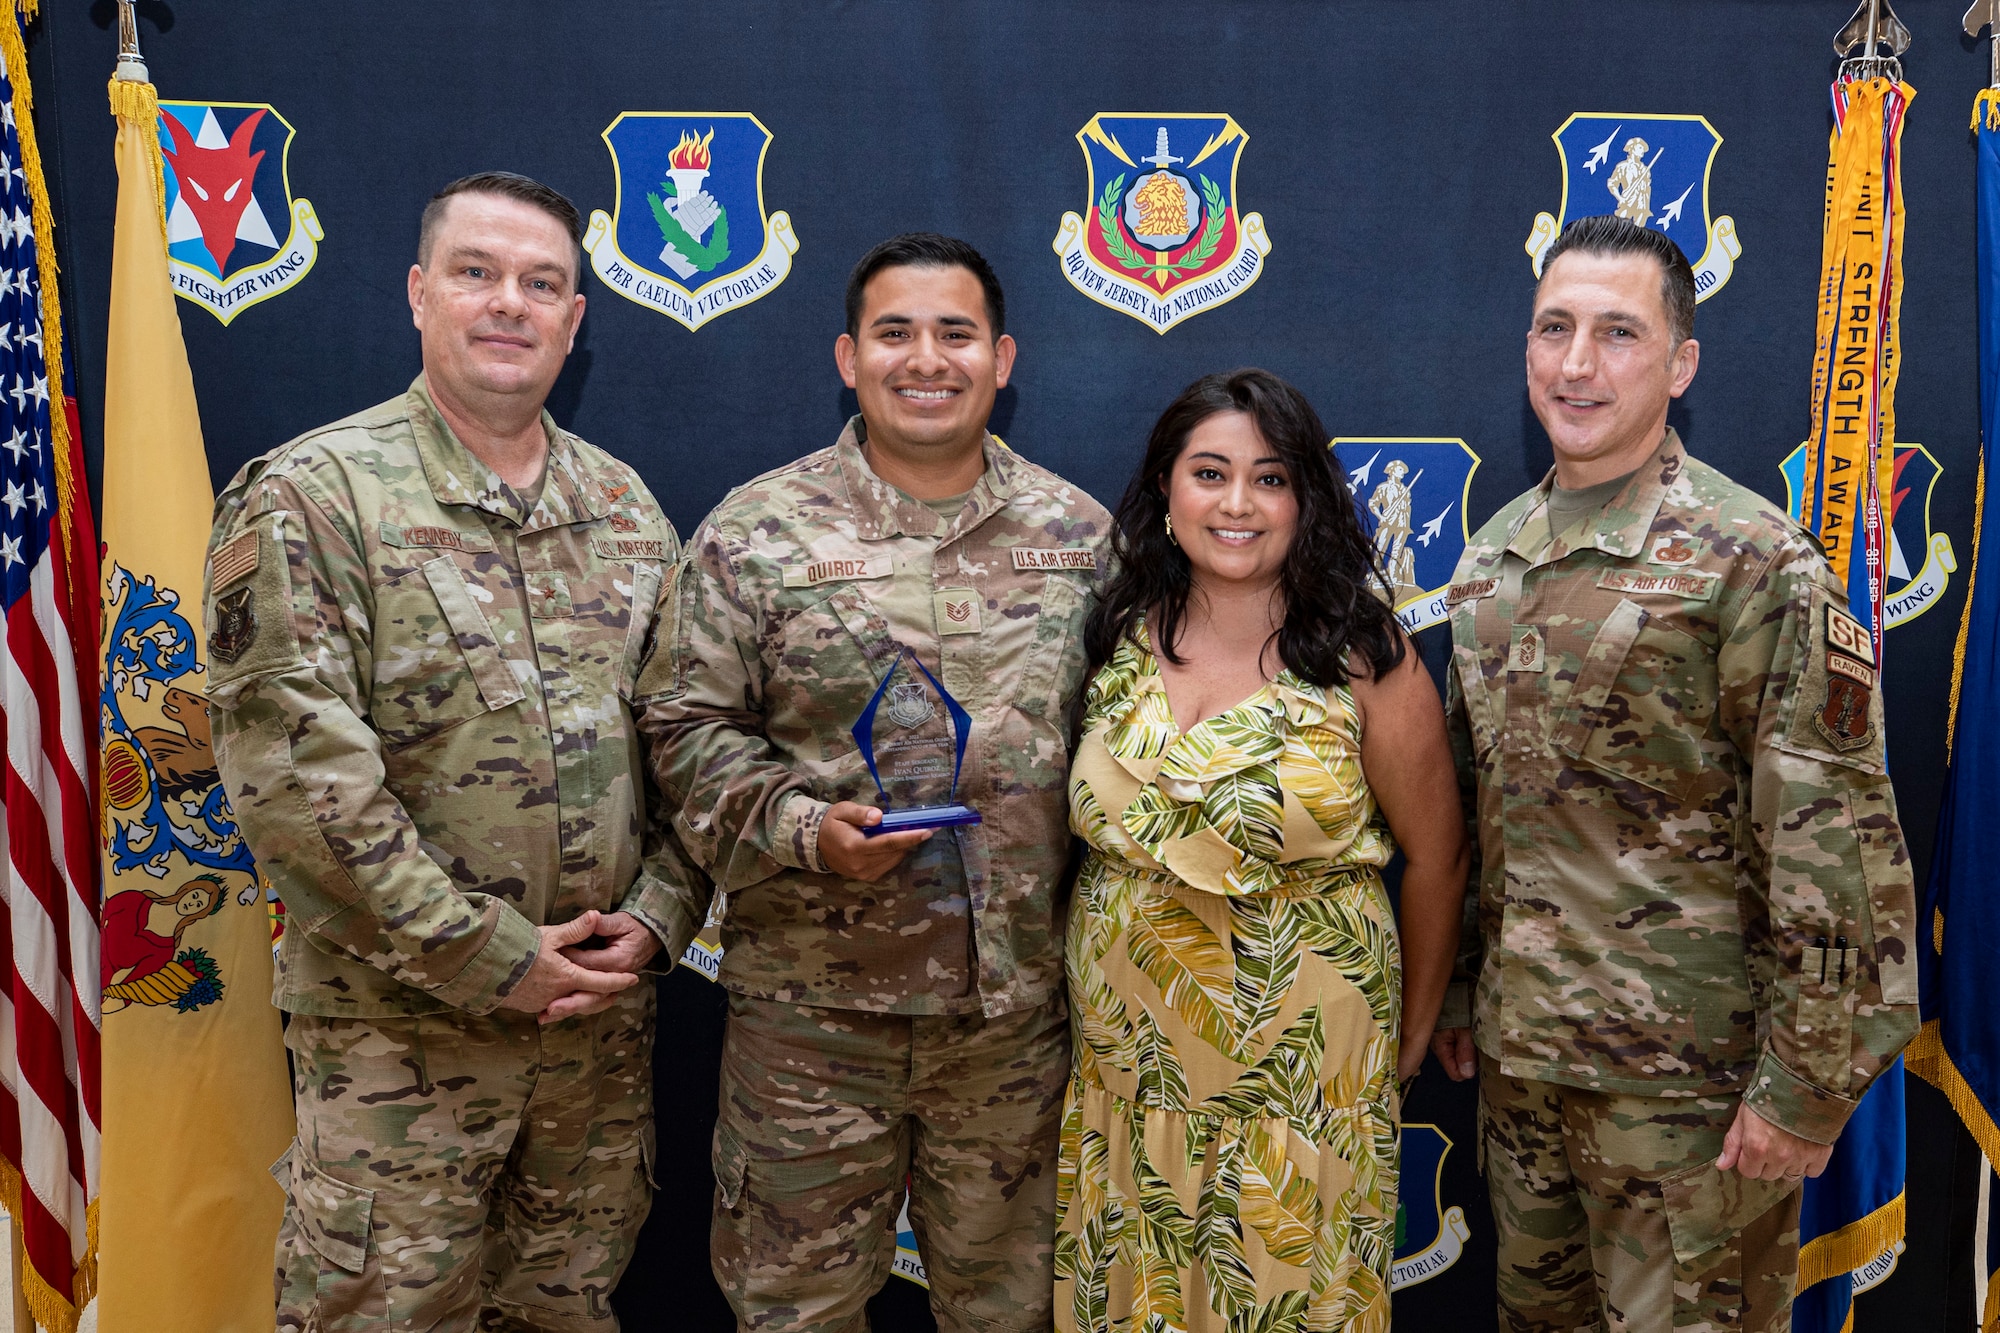 The New Jersey Air National Guard held their annual awards ceremony on Joint Base McGuire-Dix-Lakehurst, New Jersey, June 22, 2022. Master Sgt. Justin Kaenzig, Tech. Sgt. Ivan Quiroz, 177th Civil Engineering Squadron, is presented with the 2021 Outstanding NCO of the Year award by Brig. Gen. Patrick Kennedy and State Command Chief Master Sgt. Michael Rakauckas.